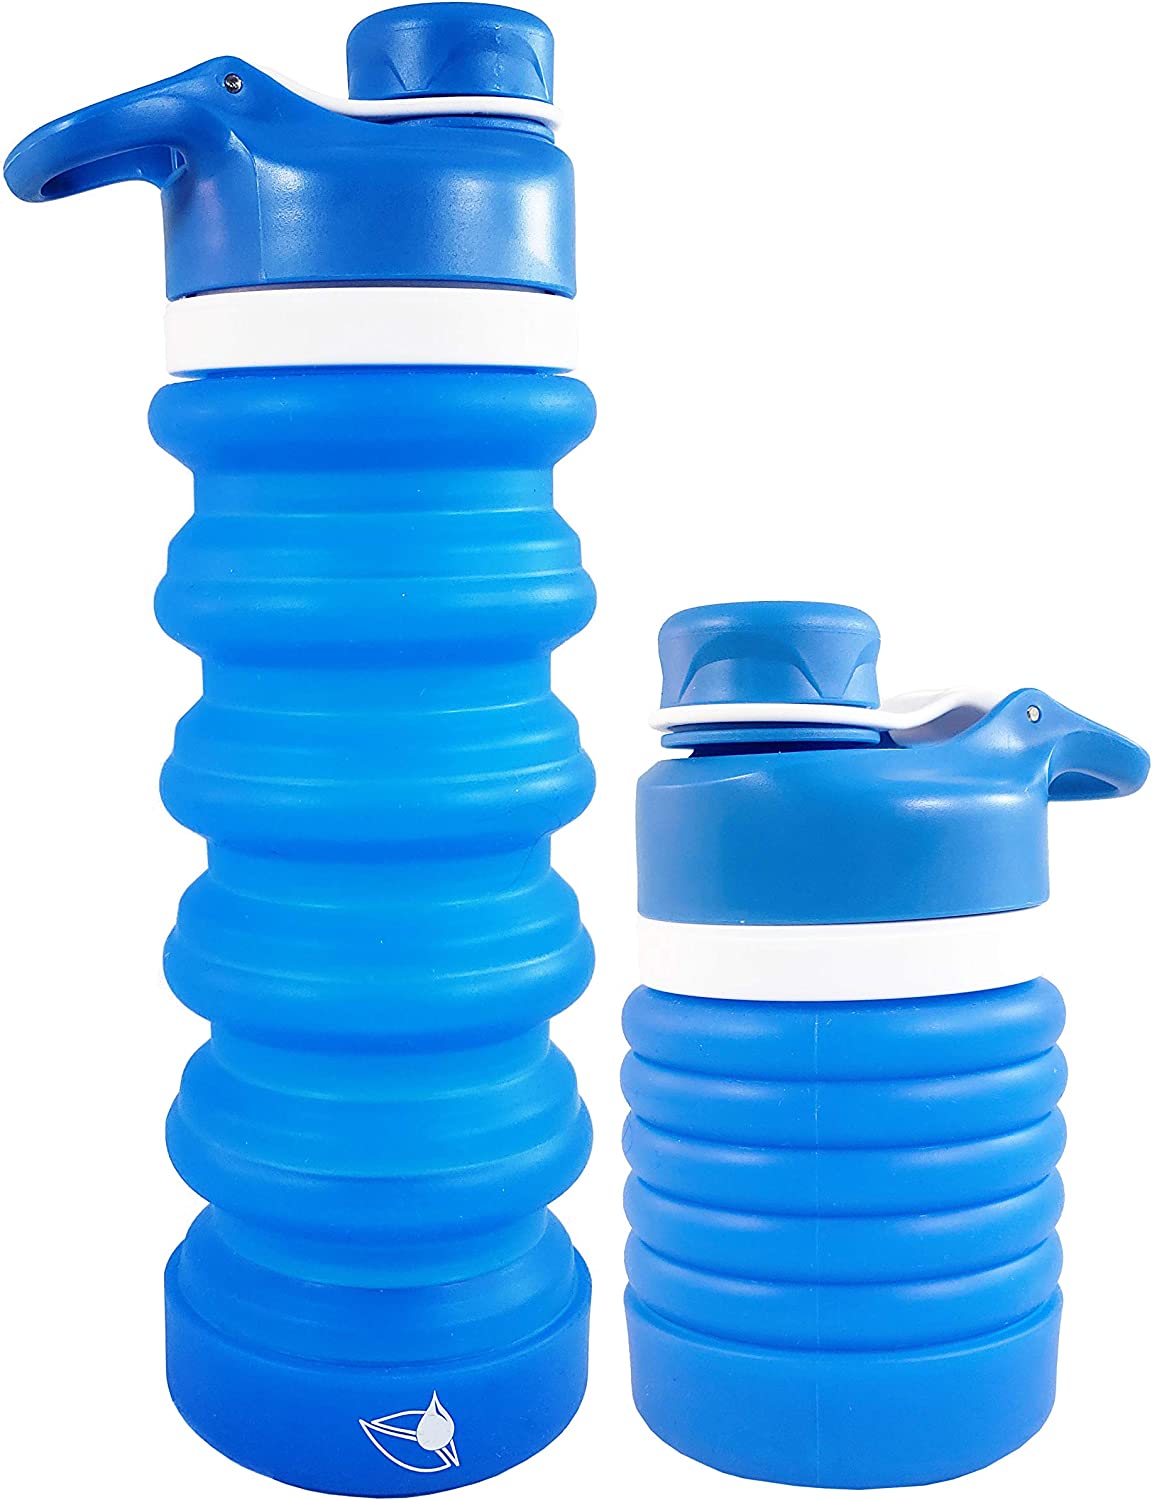 NatraCure 18oz Collapsible Water Bottle, BPA-free